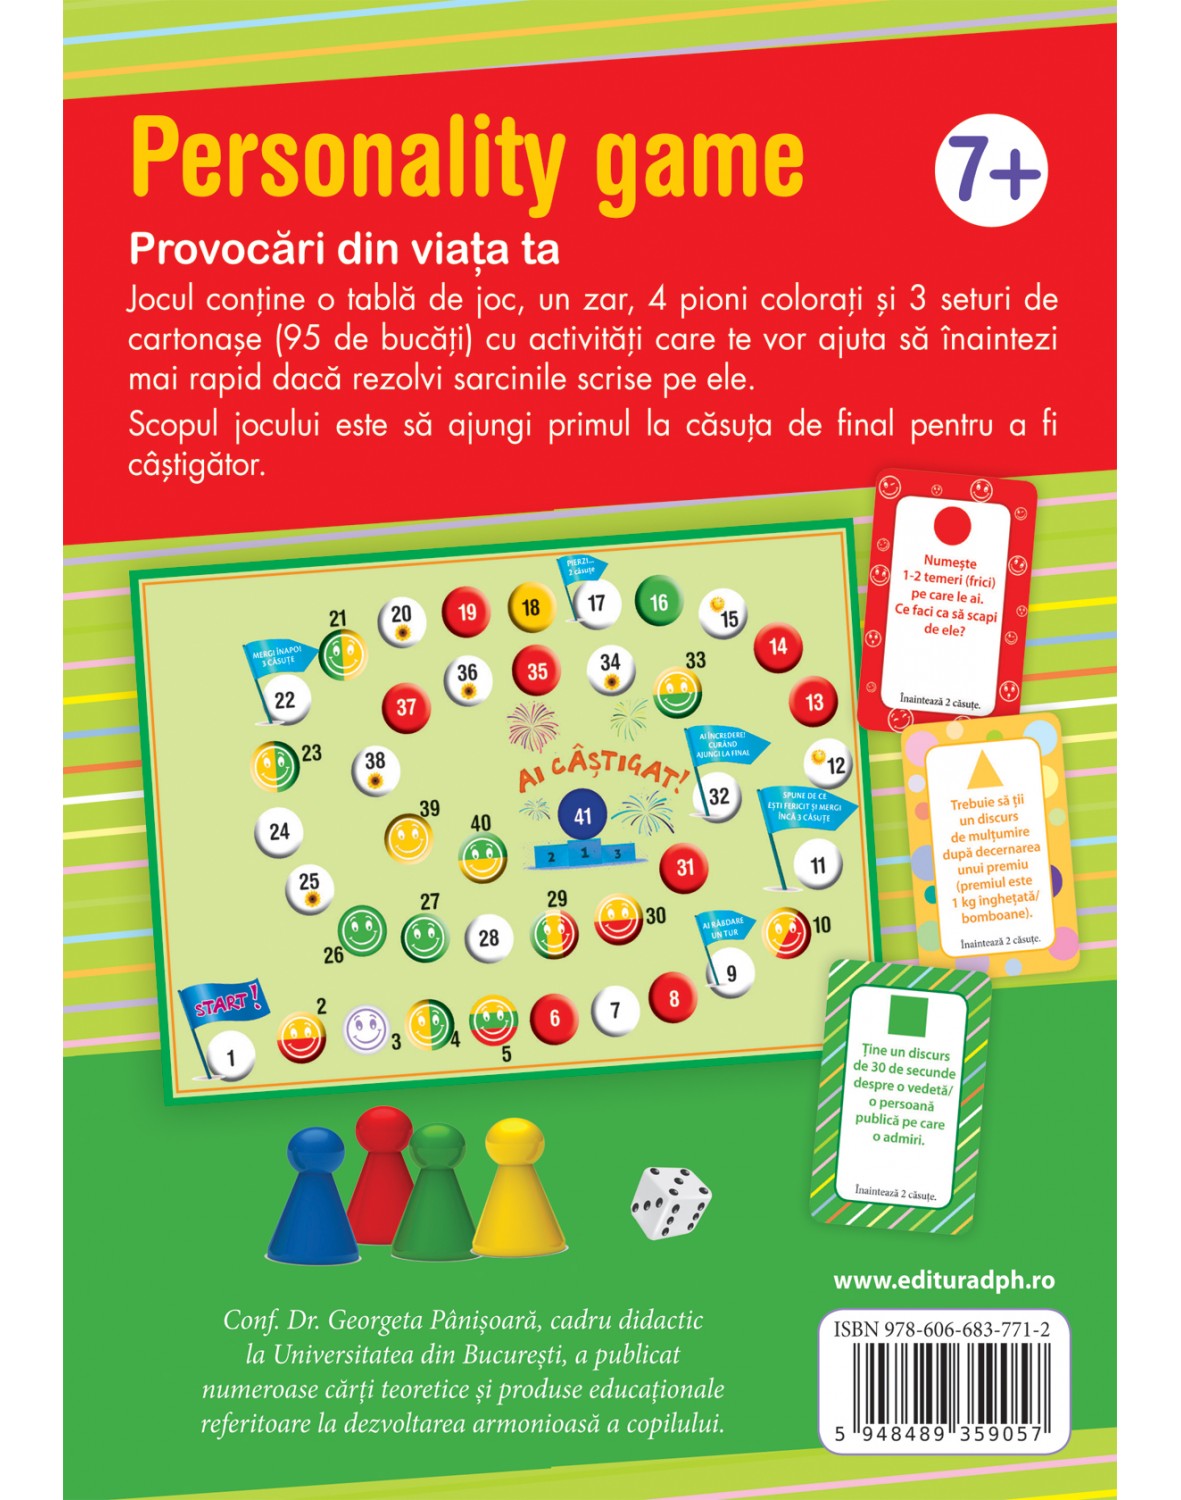 Personality game | Didactica Publishing House - 1